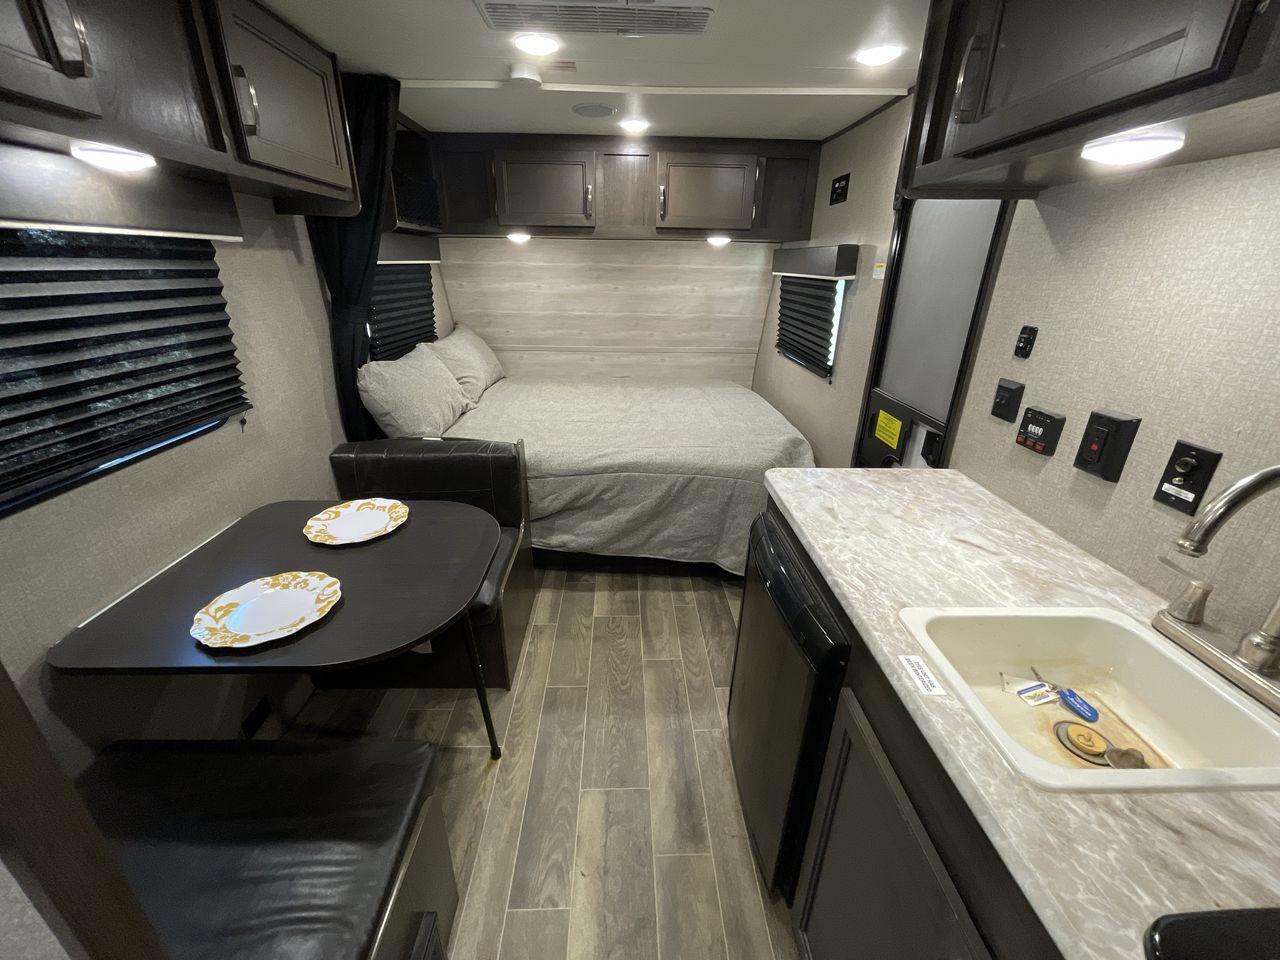 2021 JAYCO JAY FLIGHT SLX 174BH (1UJBJ0AJ1M1) , Length: 21.67 ft | Dry Weight: 3,075 lbs | GVWR: 3,950 lbs | Slides: 0 transmission, located at 4319 N Main Street, Cleburne, TX, 76033, (817) 221-0660, 32.435829, -97.384178 - Take the 2021 Jayco Jay Flight SLX 174BH travel trailer out on your camping adventures. This lightweight and small RV is ideal for people looking for an affordable and cozy way to enjoy the great outdoors. The dimensions of this unit are 21.67 ft in length, 7.08 ft in width, and 9.17 ft in height. I - Photo #15